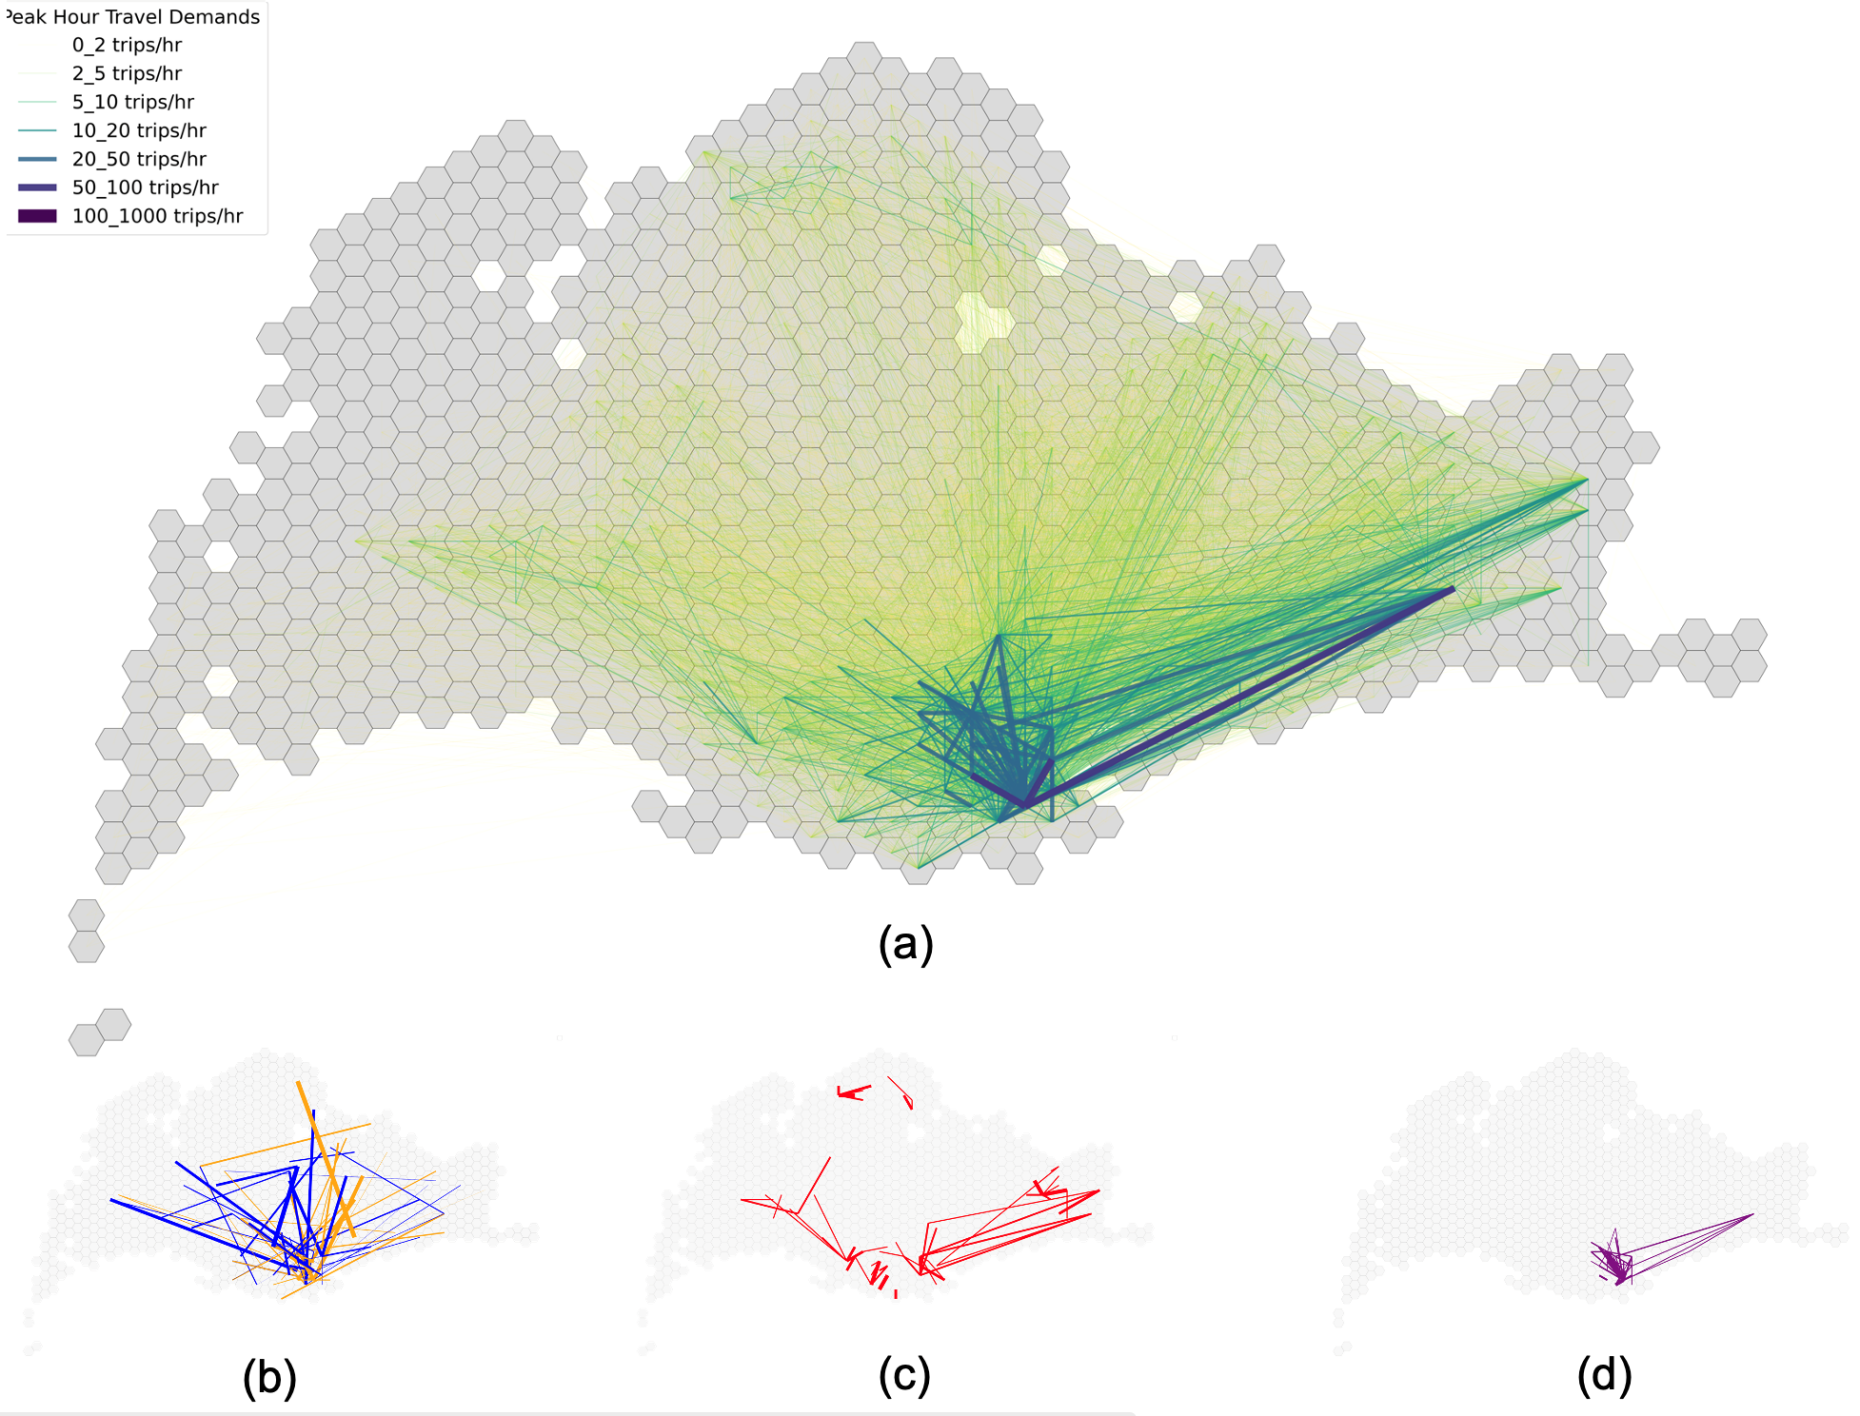 Figure: Taxi trips and generative variations under: (a) Status-quo, (b) Stochastic variations in travel demands, (c) Increase in trips in peripheral city centres due to the decentralisation strategy, (d) Surge in trips in downtown regions resulting from the strong city centre policy.